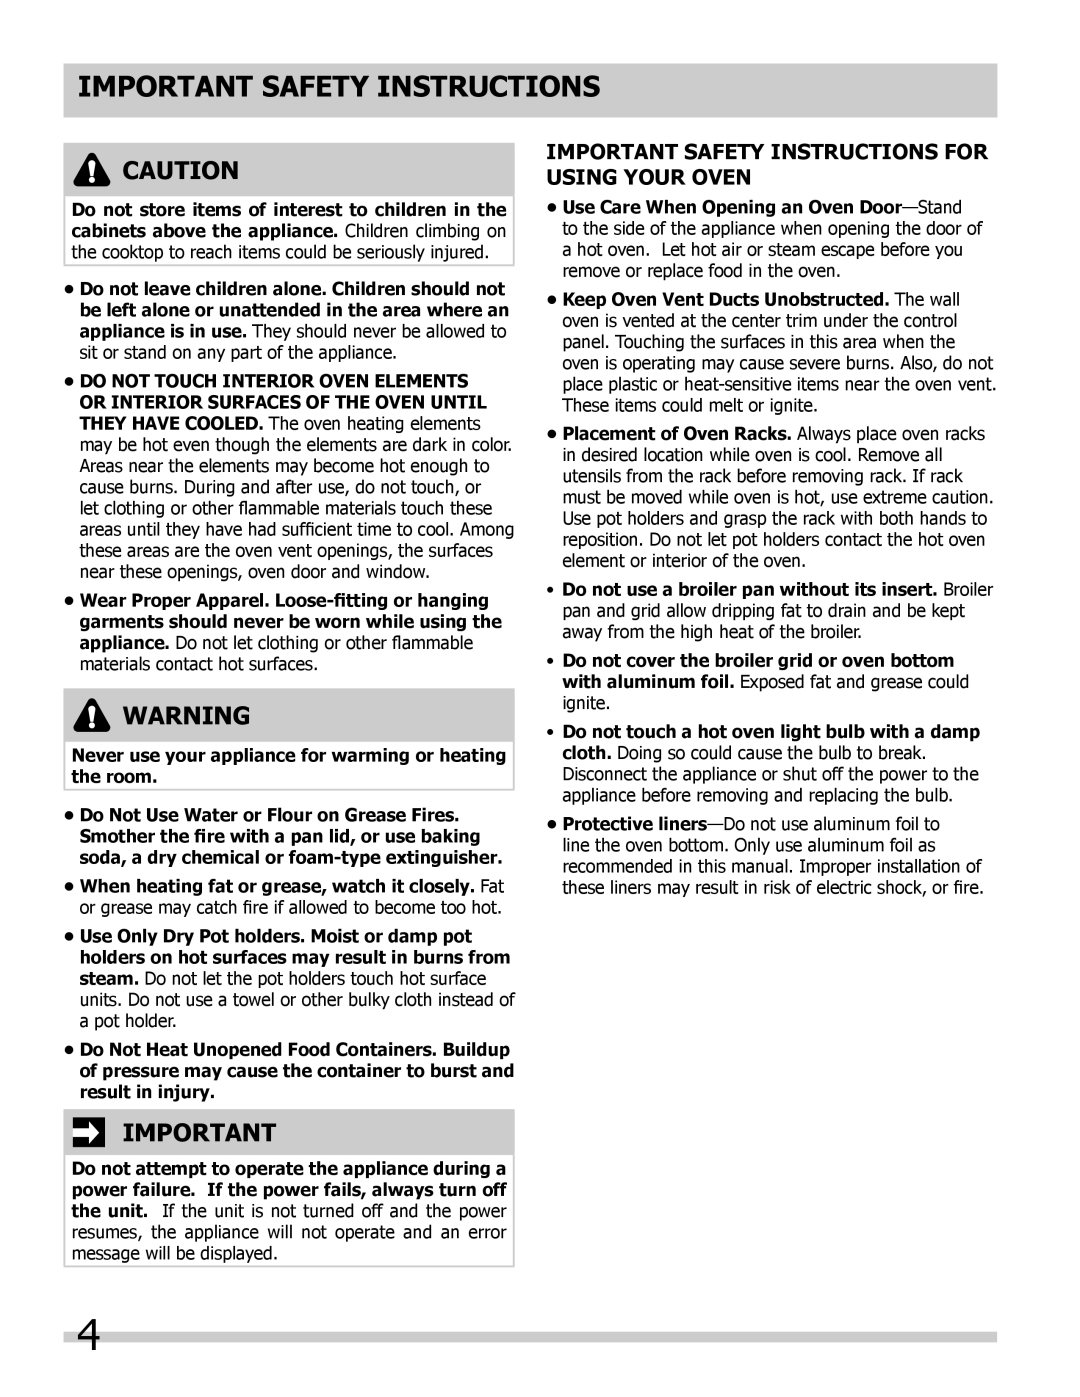 Frigidaire FFET2725LB, FFET3025LW, FFET2725LS, FFET3025LB, FFET2725LW Important Safety Instructions For Using Your Oven 